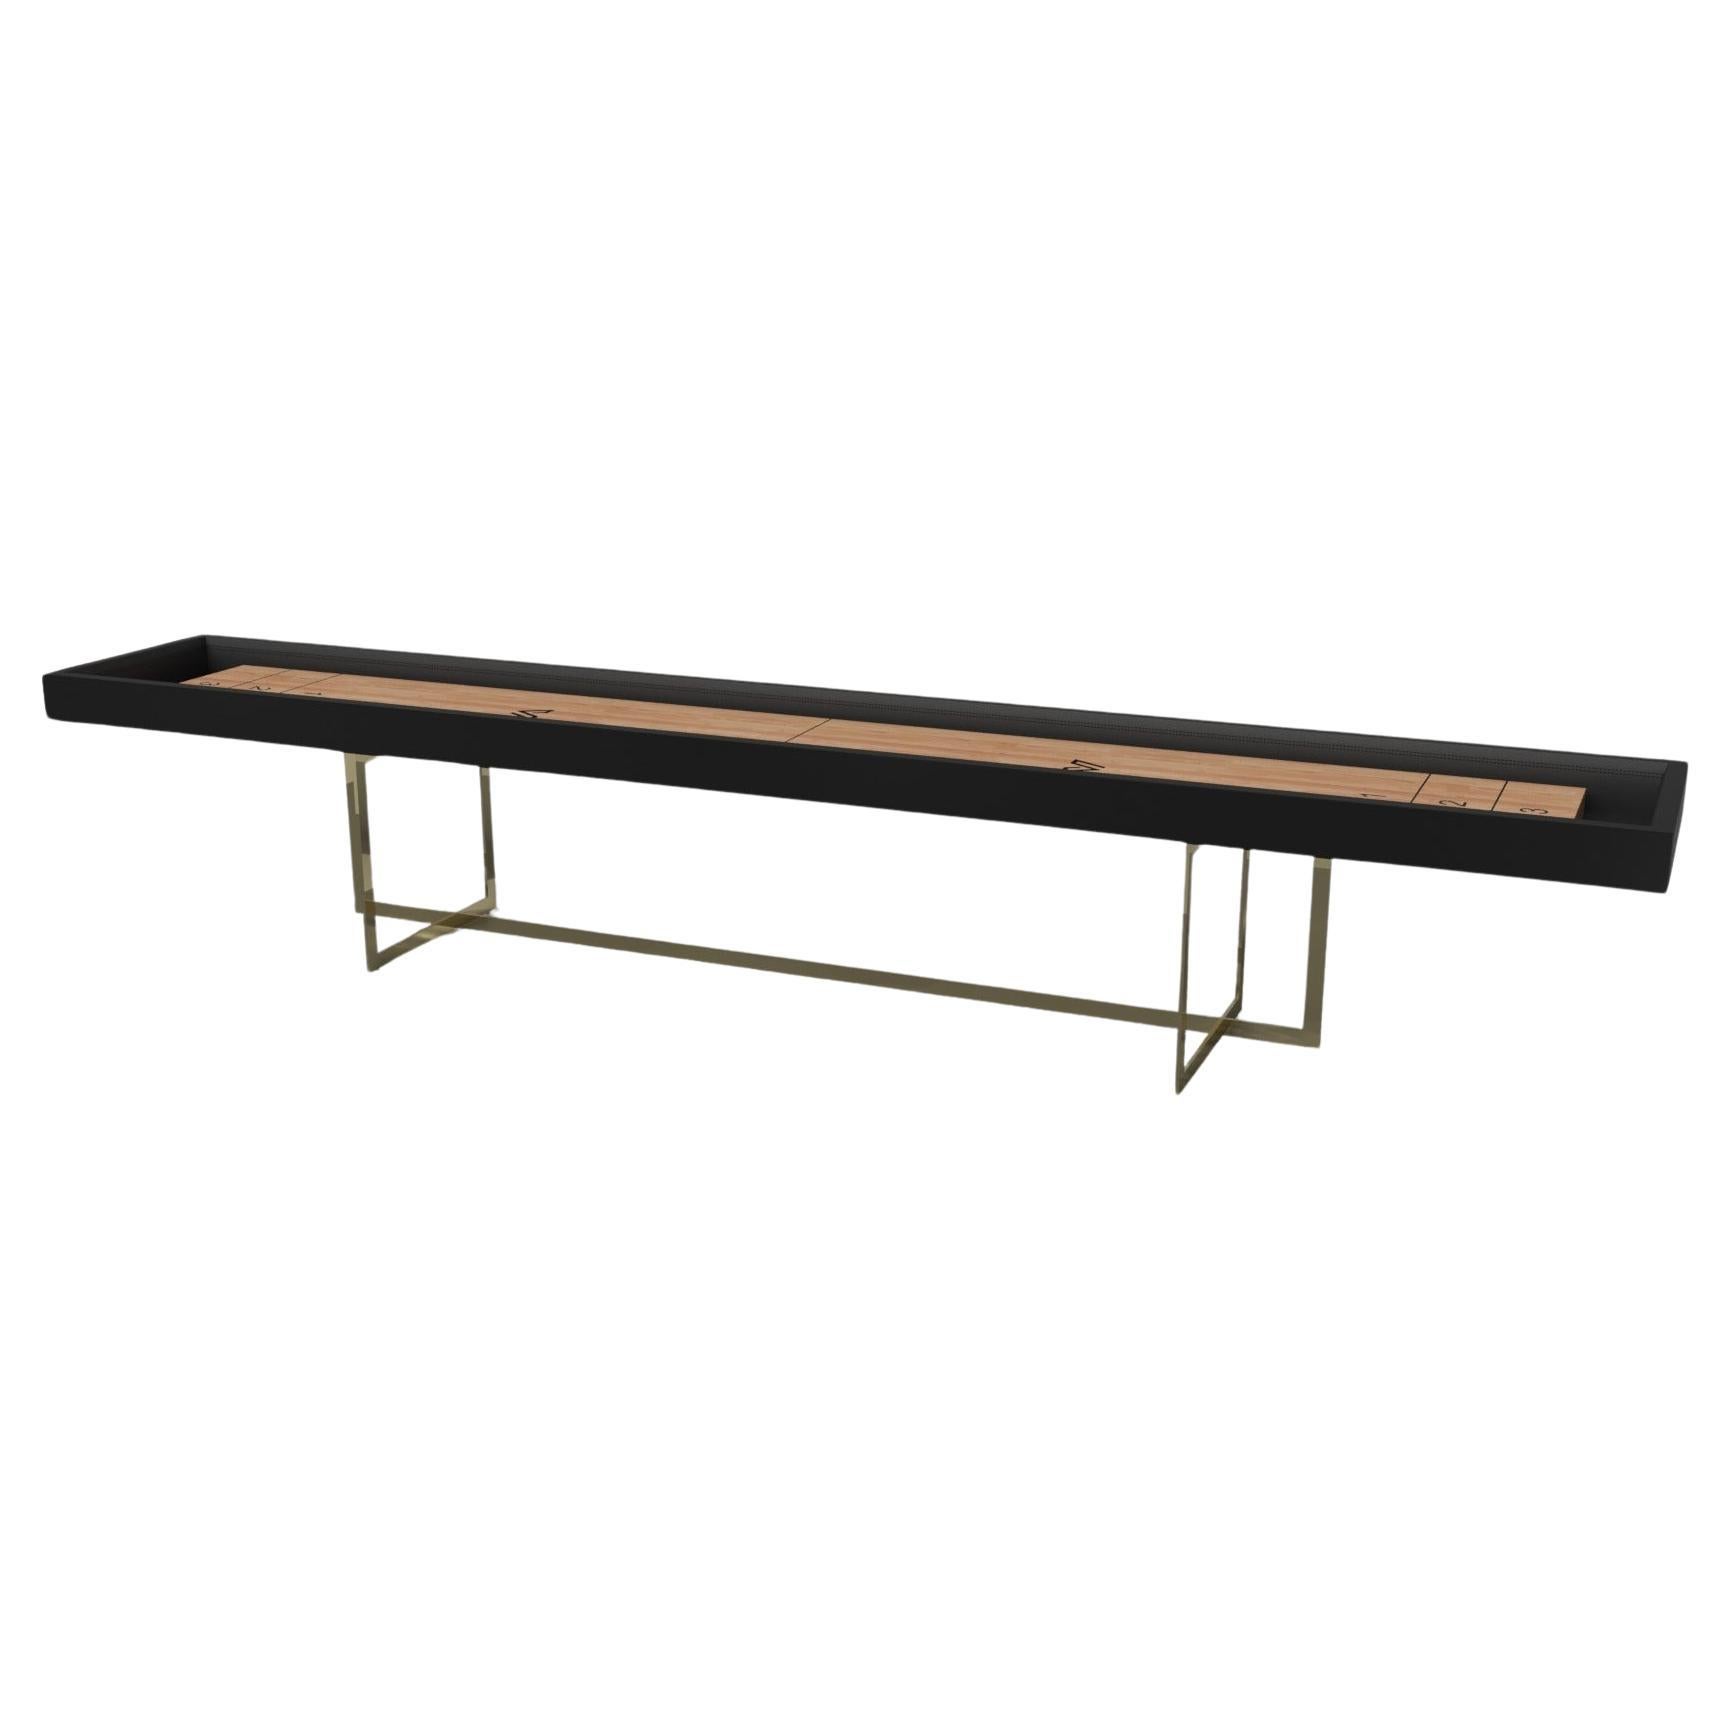 Elevate Customs Beso Shuffleboard Tables /Brass Stainless Steel Metal in 9' -USA For Sale